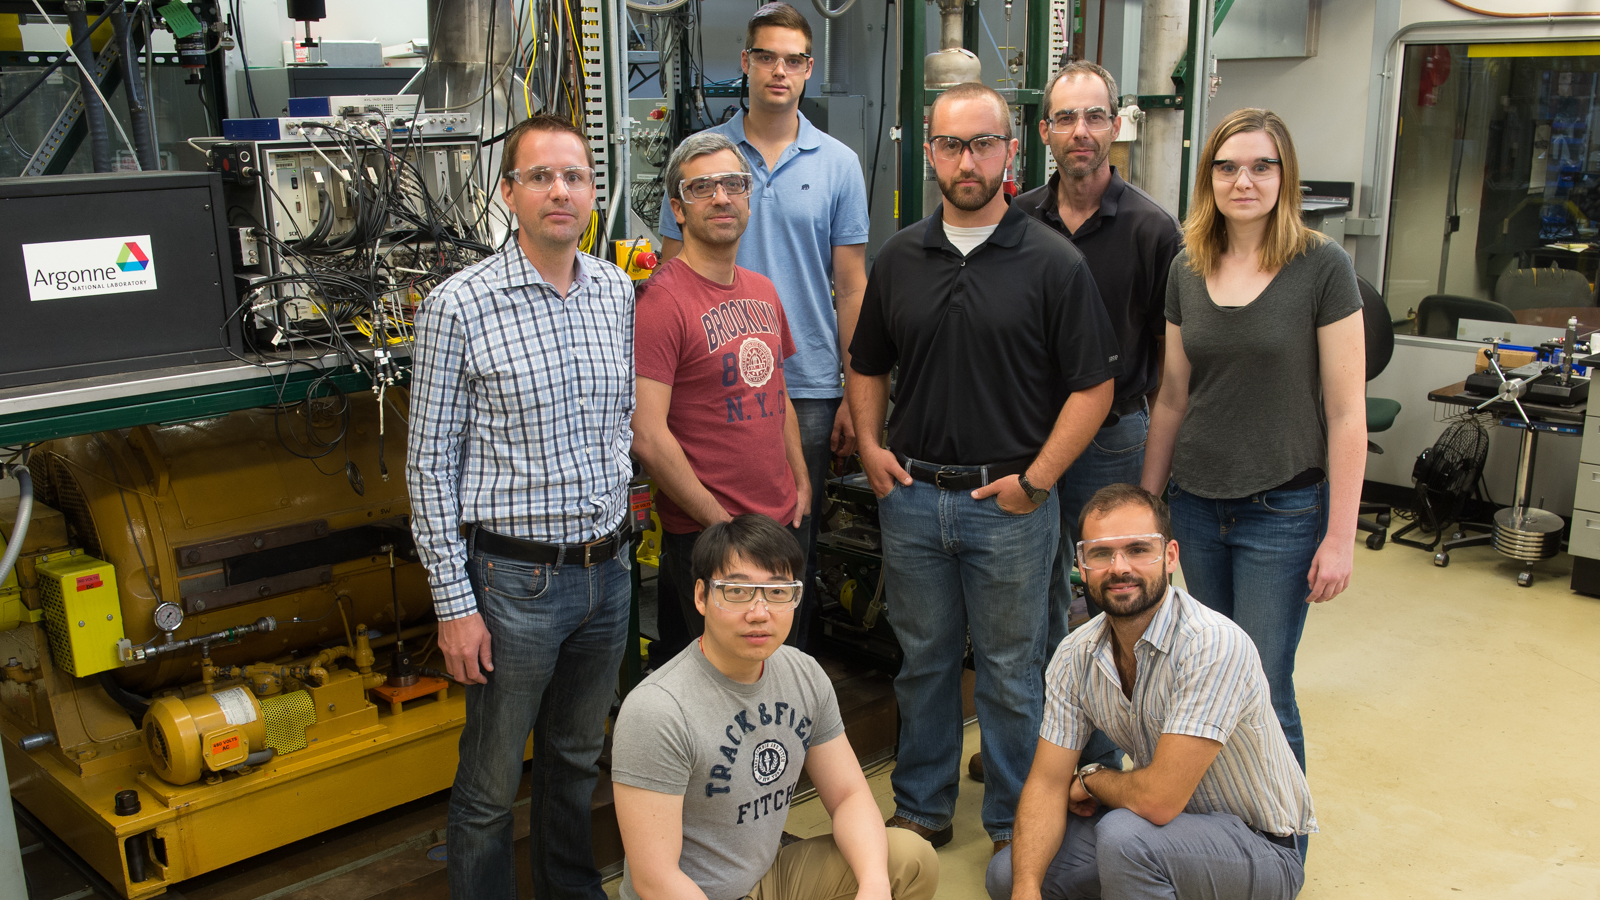 The research group includes, from left to right, kneeling: Anqi Zhang and Lorenzo Bartolucci; standing: Thomas Wallner, Riccardo Scarcelli, Michael Pamminger, Jim Sevik, Tim Rutter, and Carrie Hall.